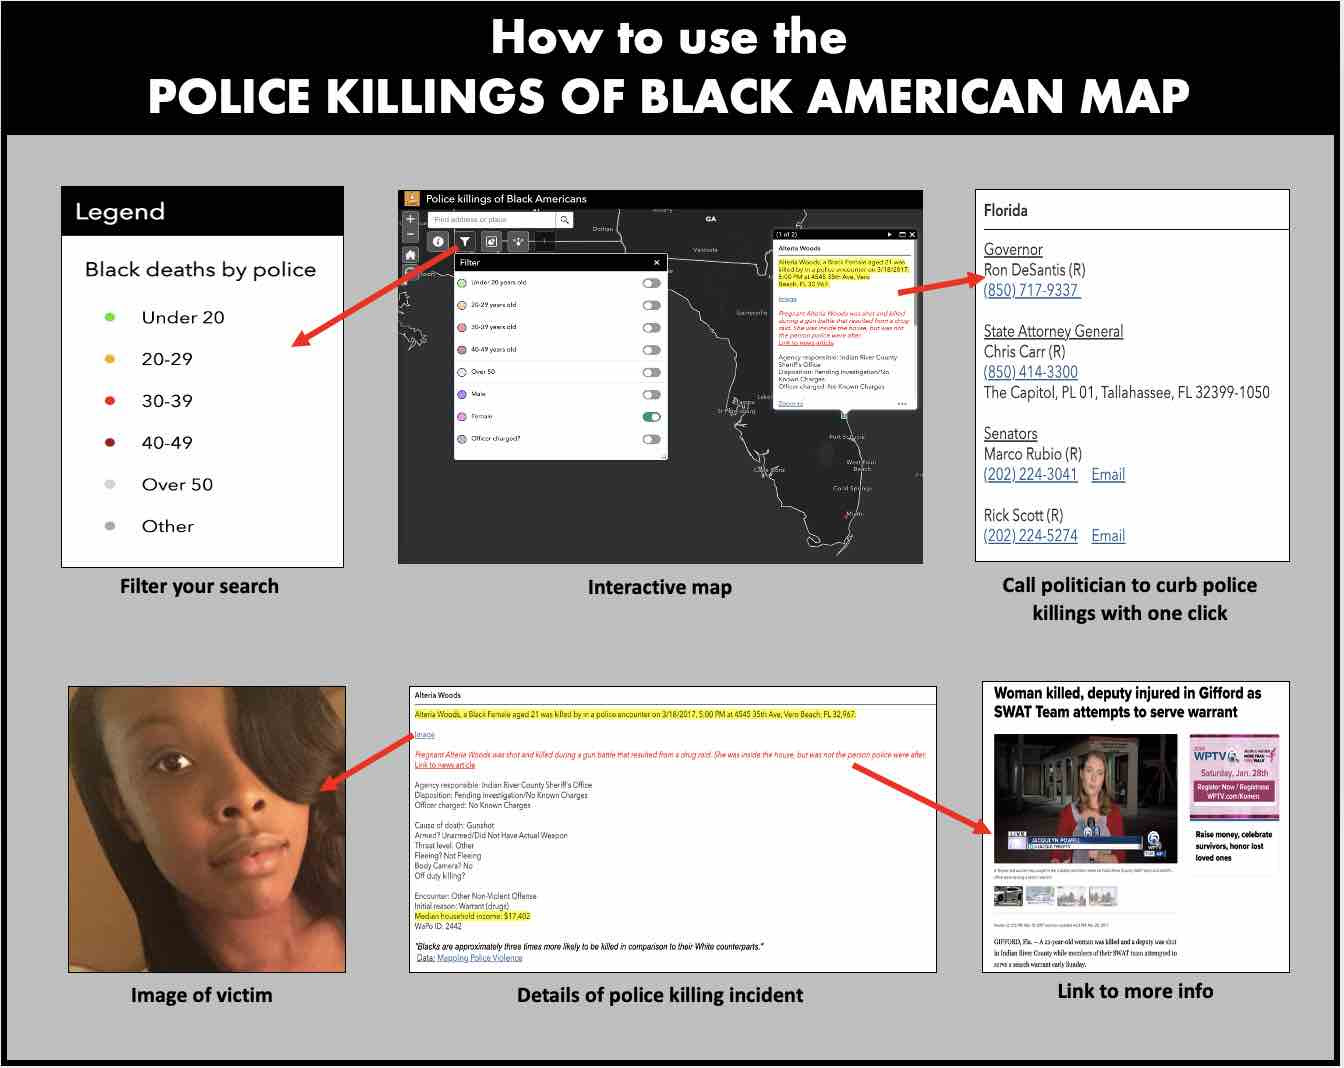 How to use the Police Killings of Black Americans map